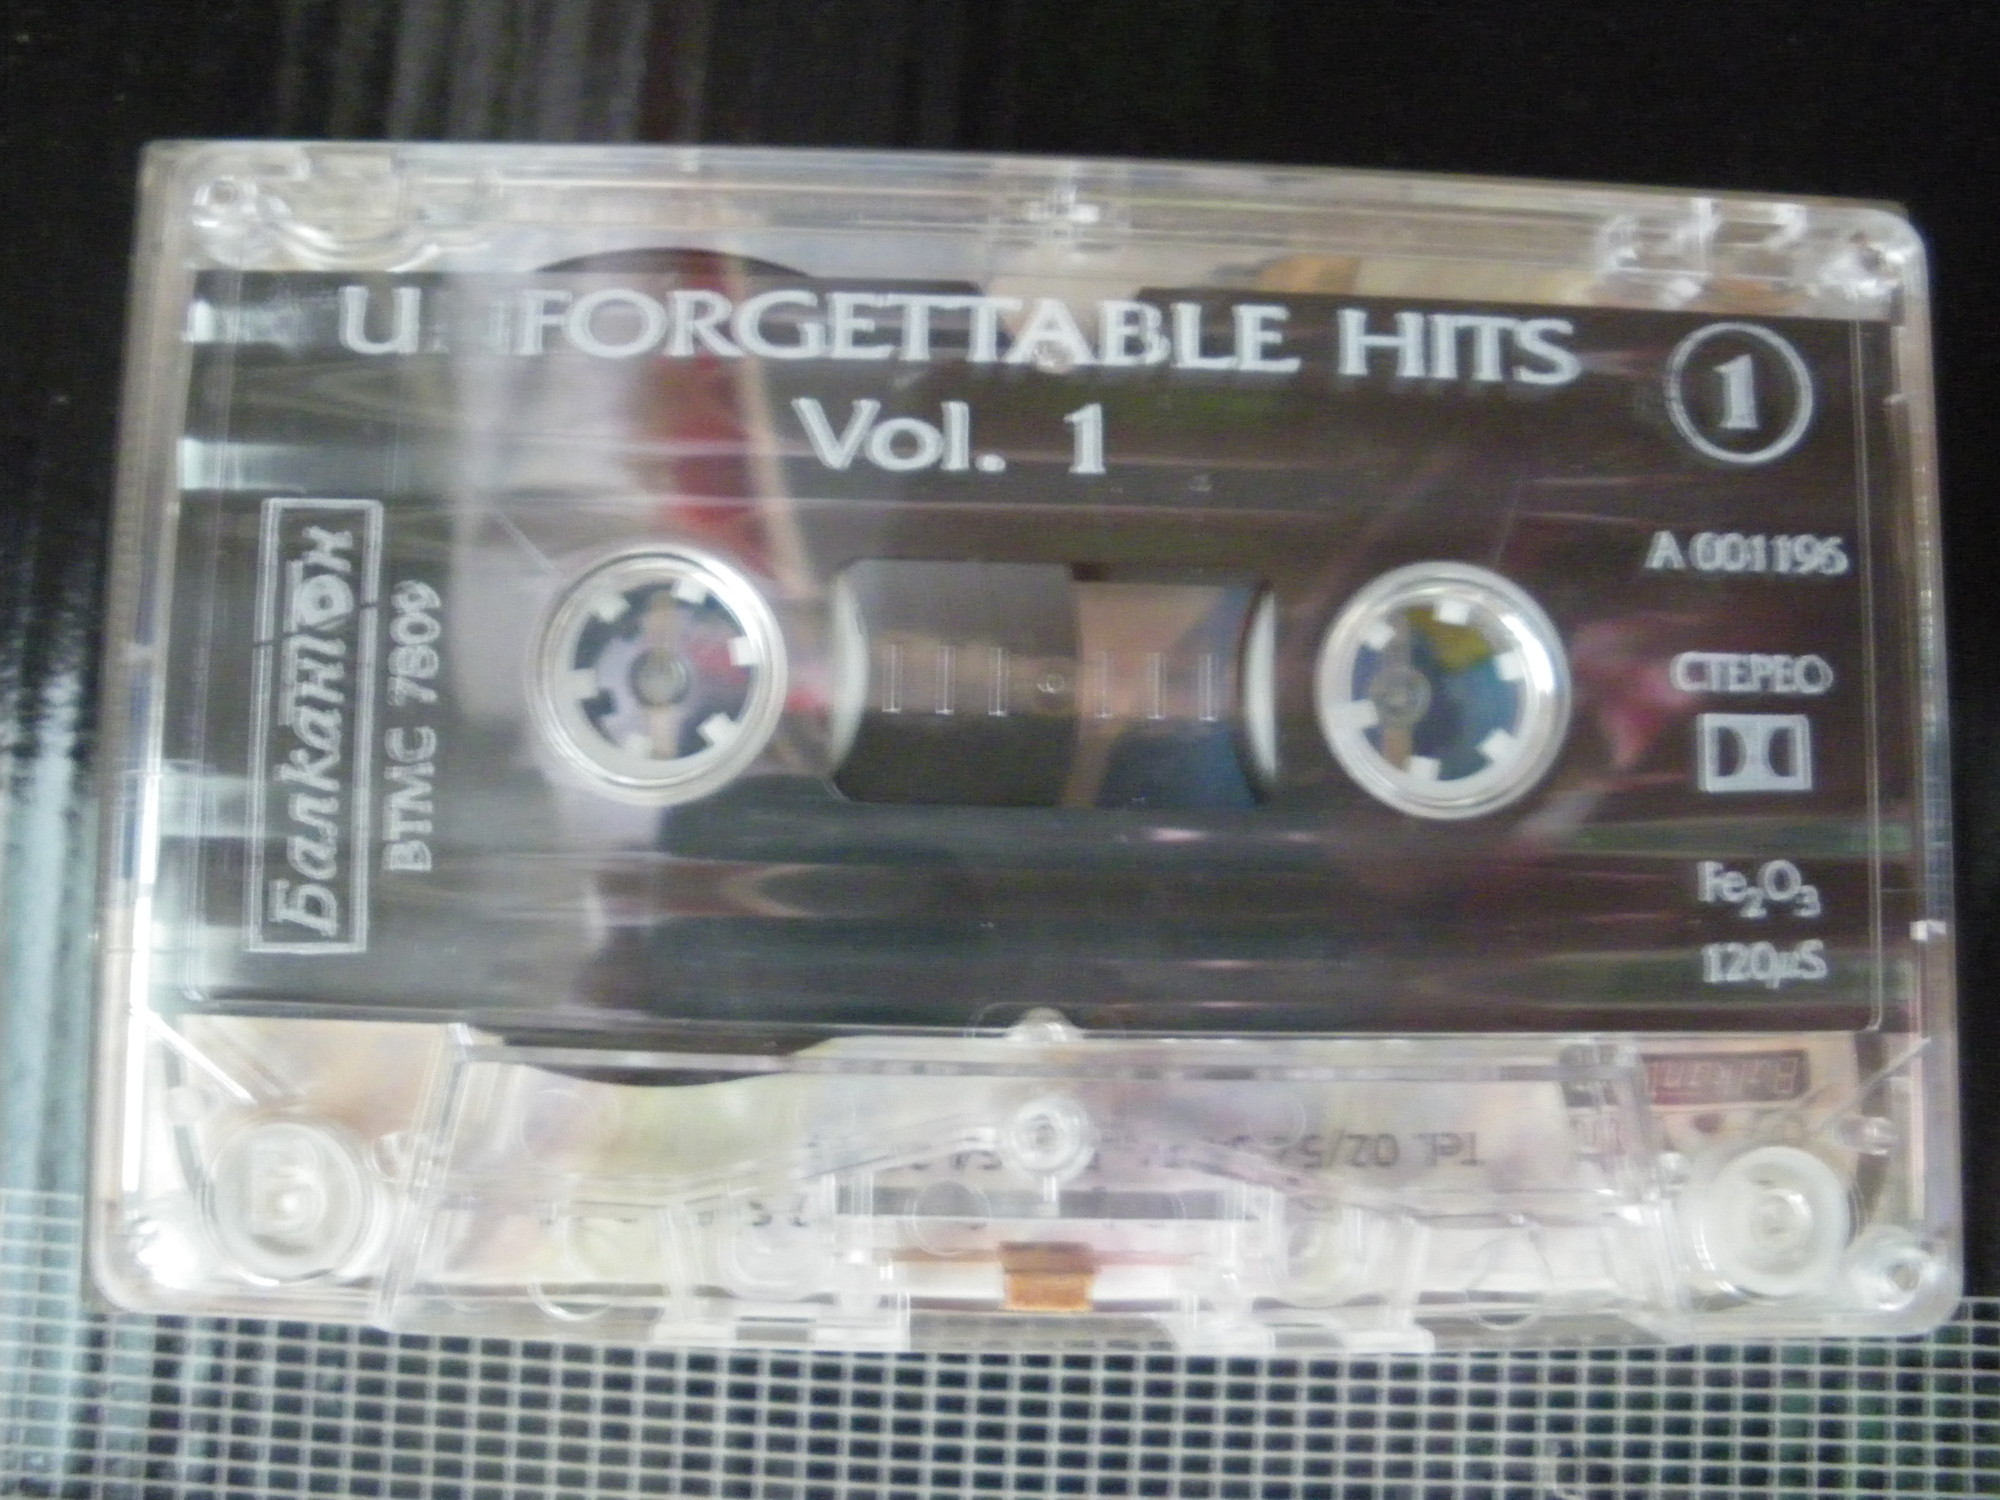 Unforgettable hits - 1